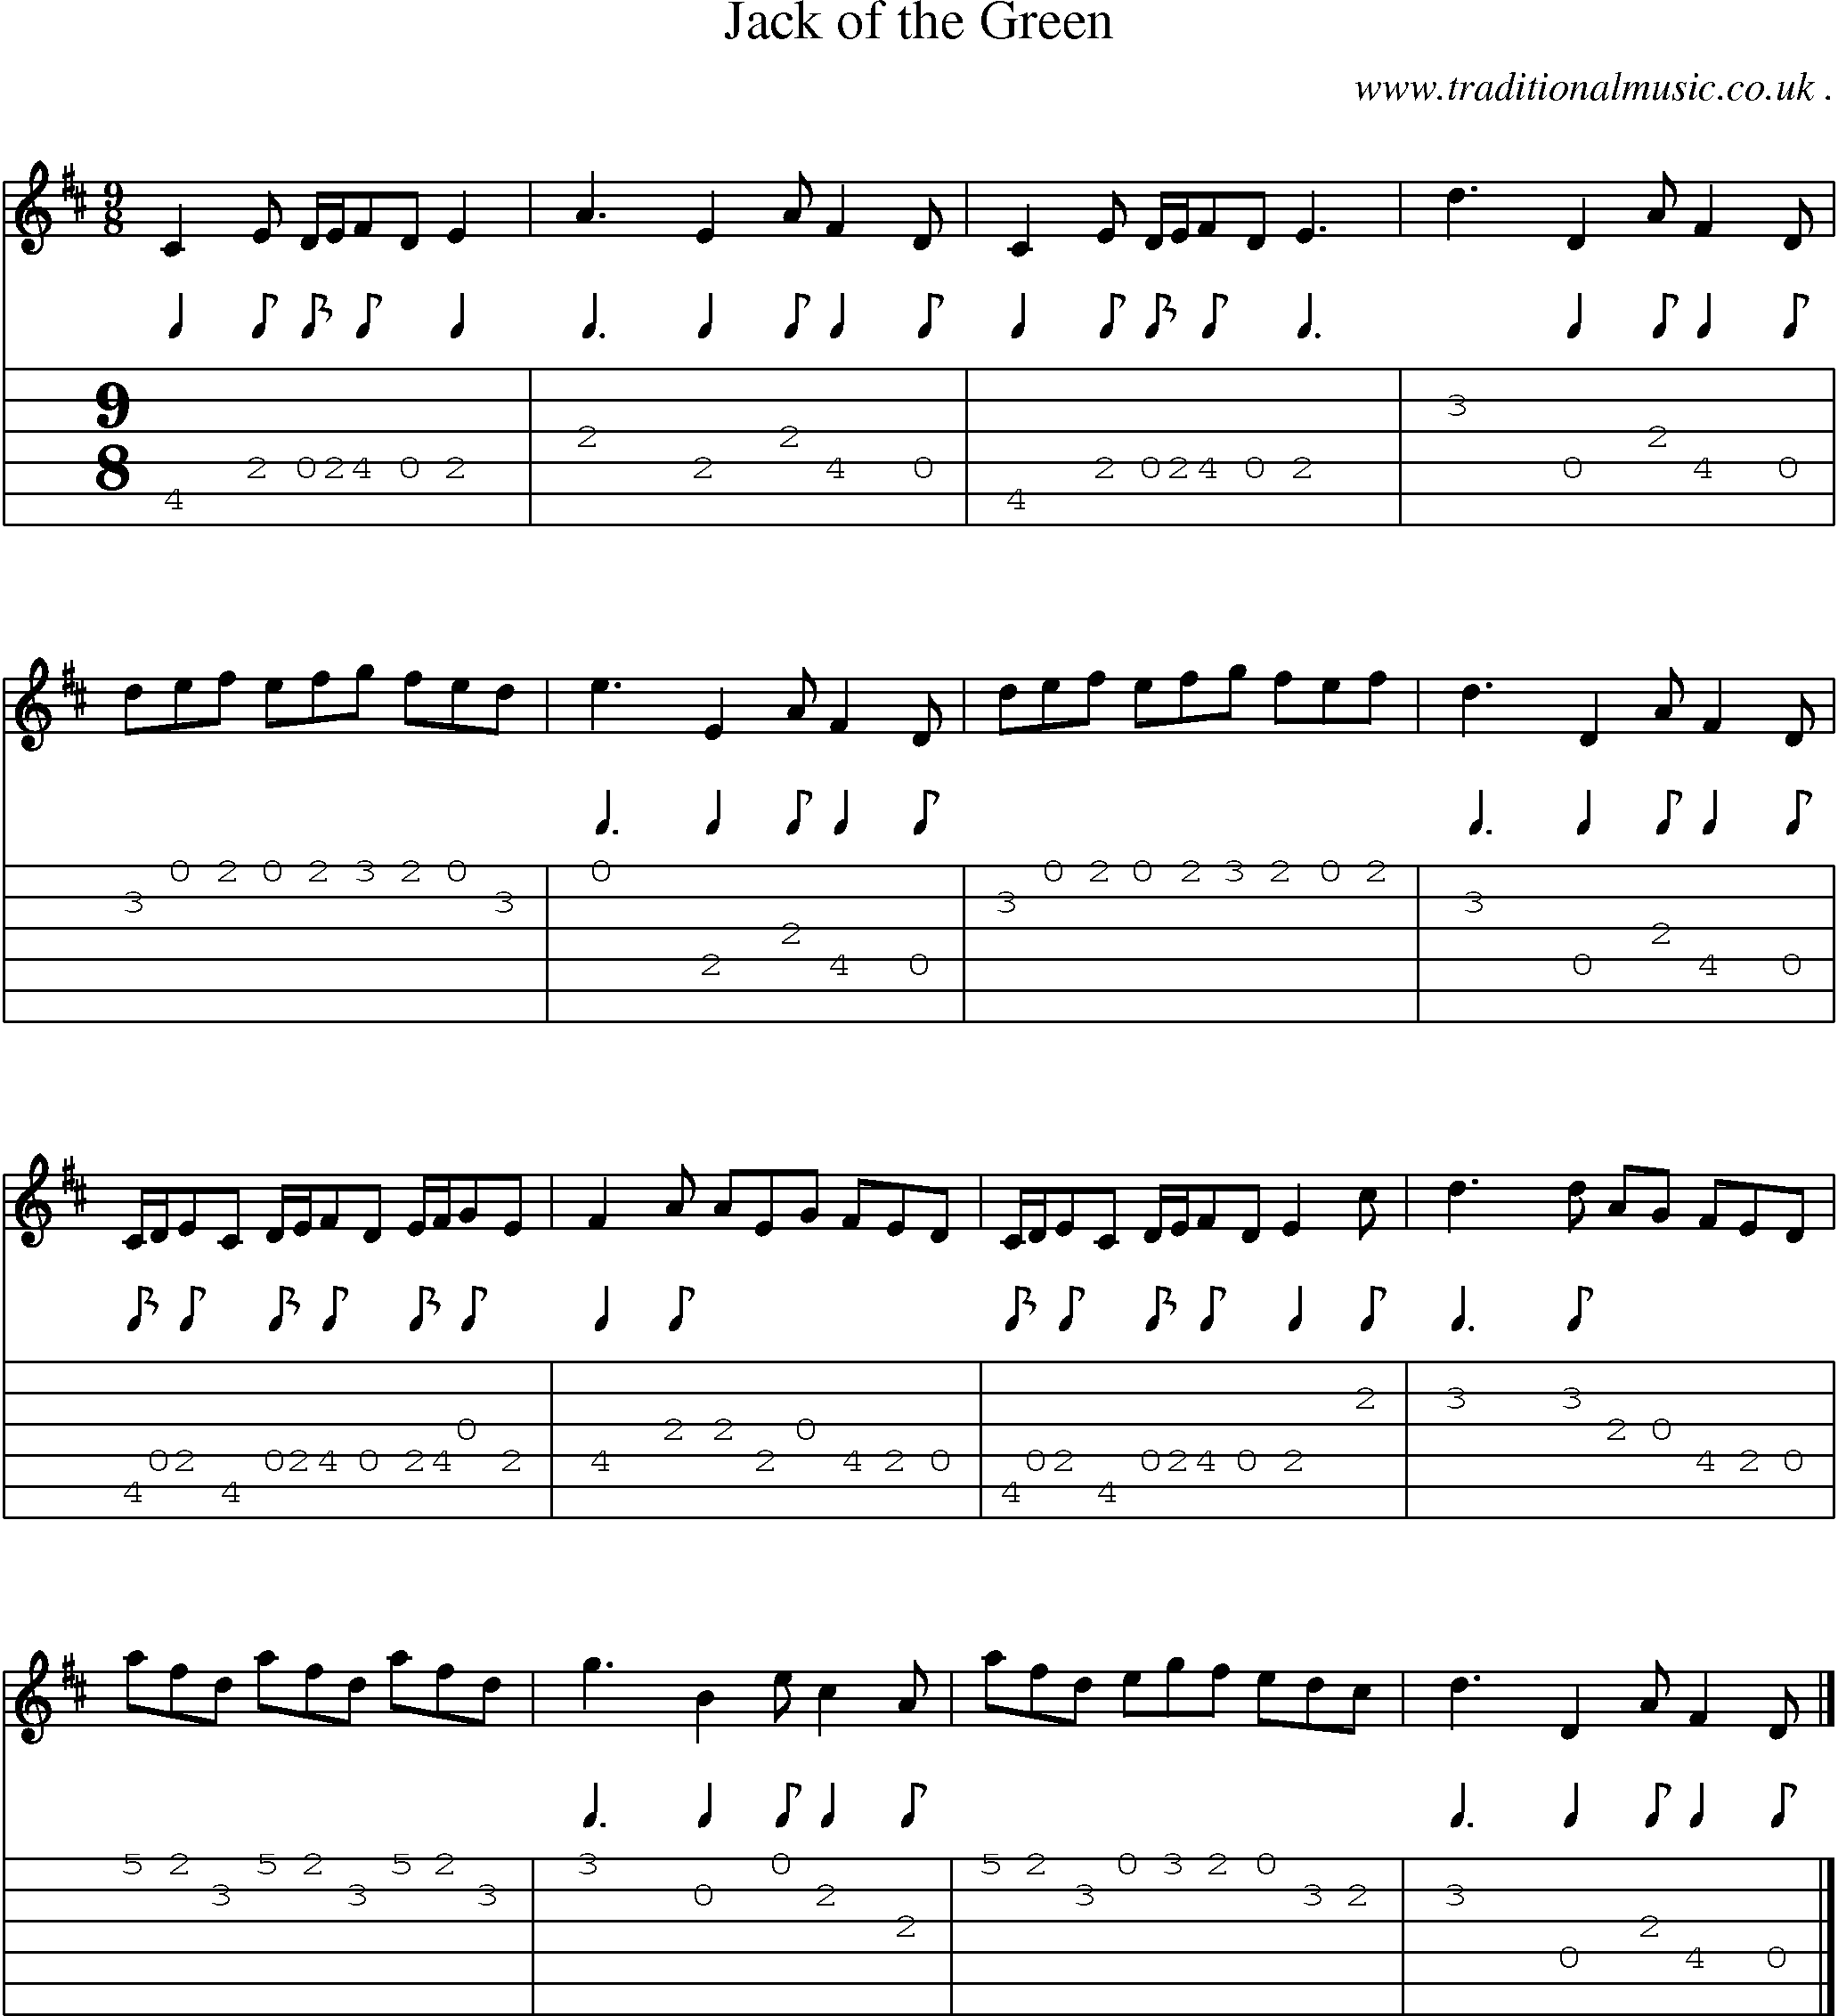 Sheet-music  score, Chords and Guitar Tabs for Jack Of The Green